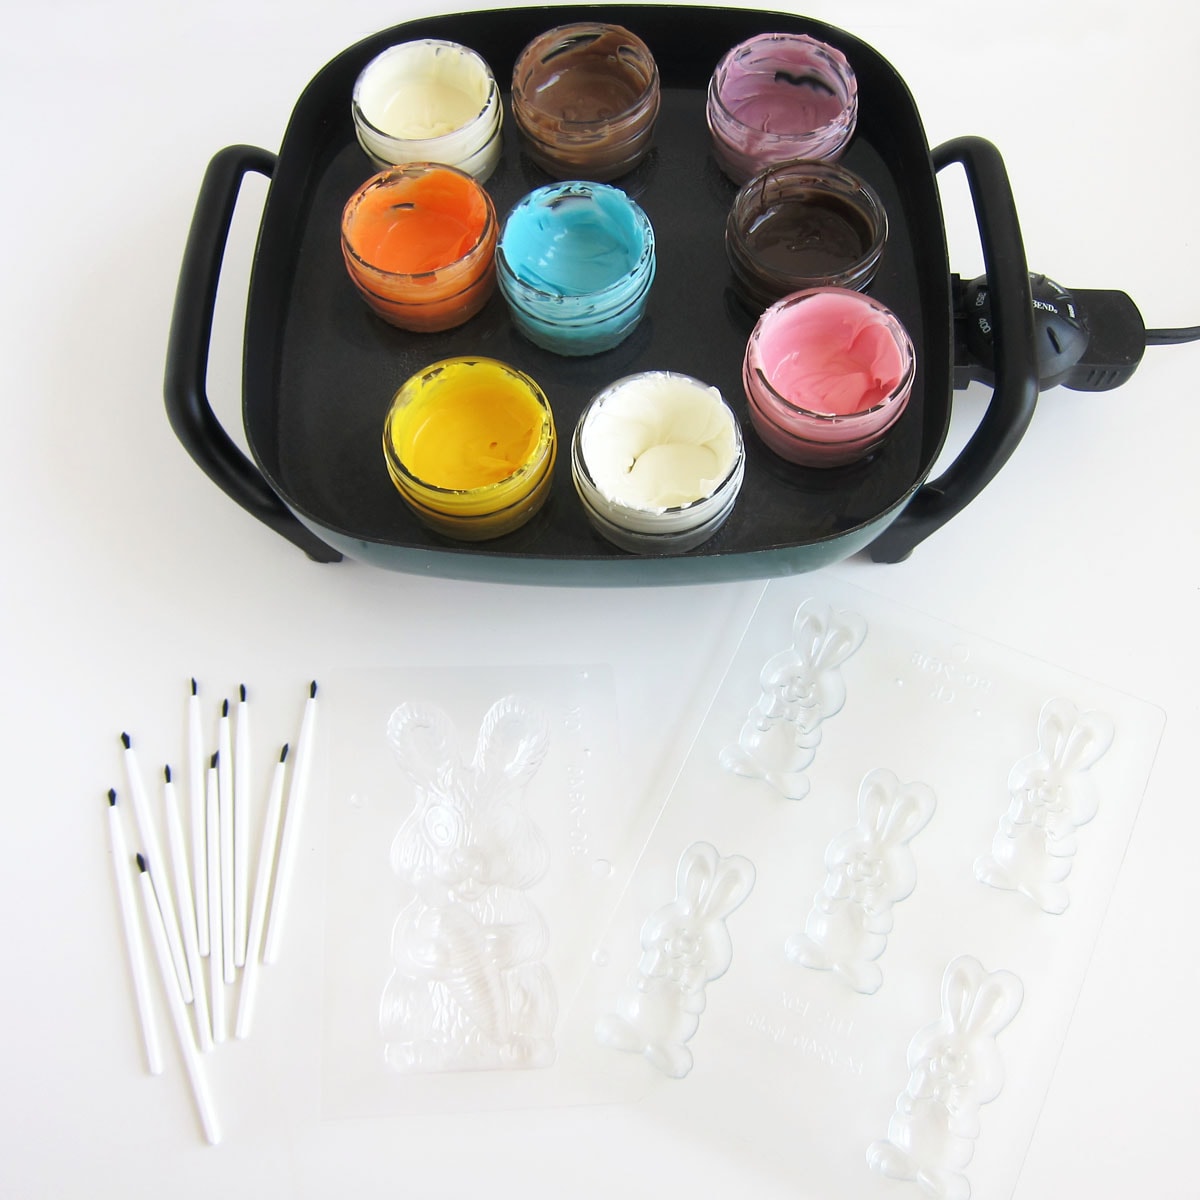 Melting candy melts in a water bath in an electric skillet sitting next to paint brushes and candy molds.